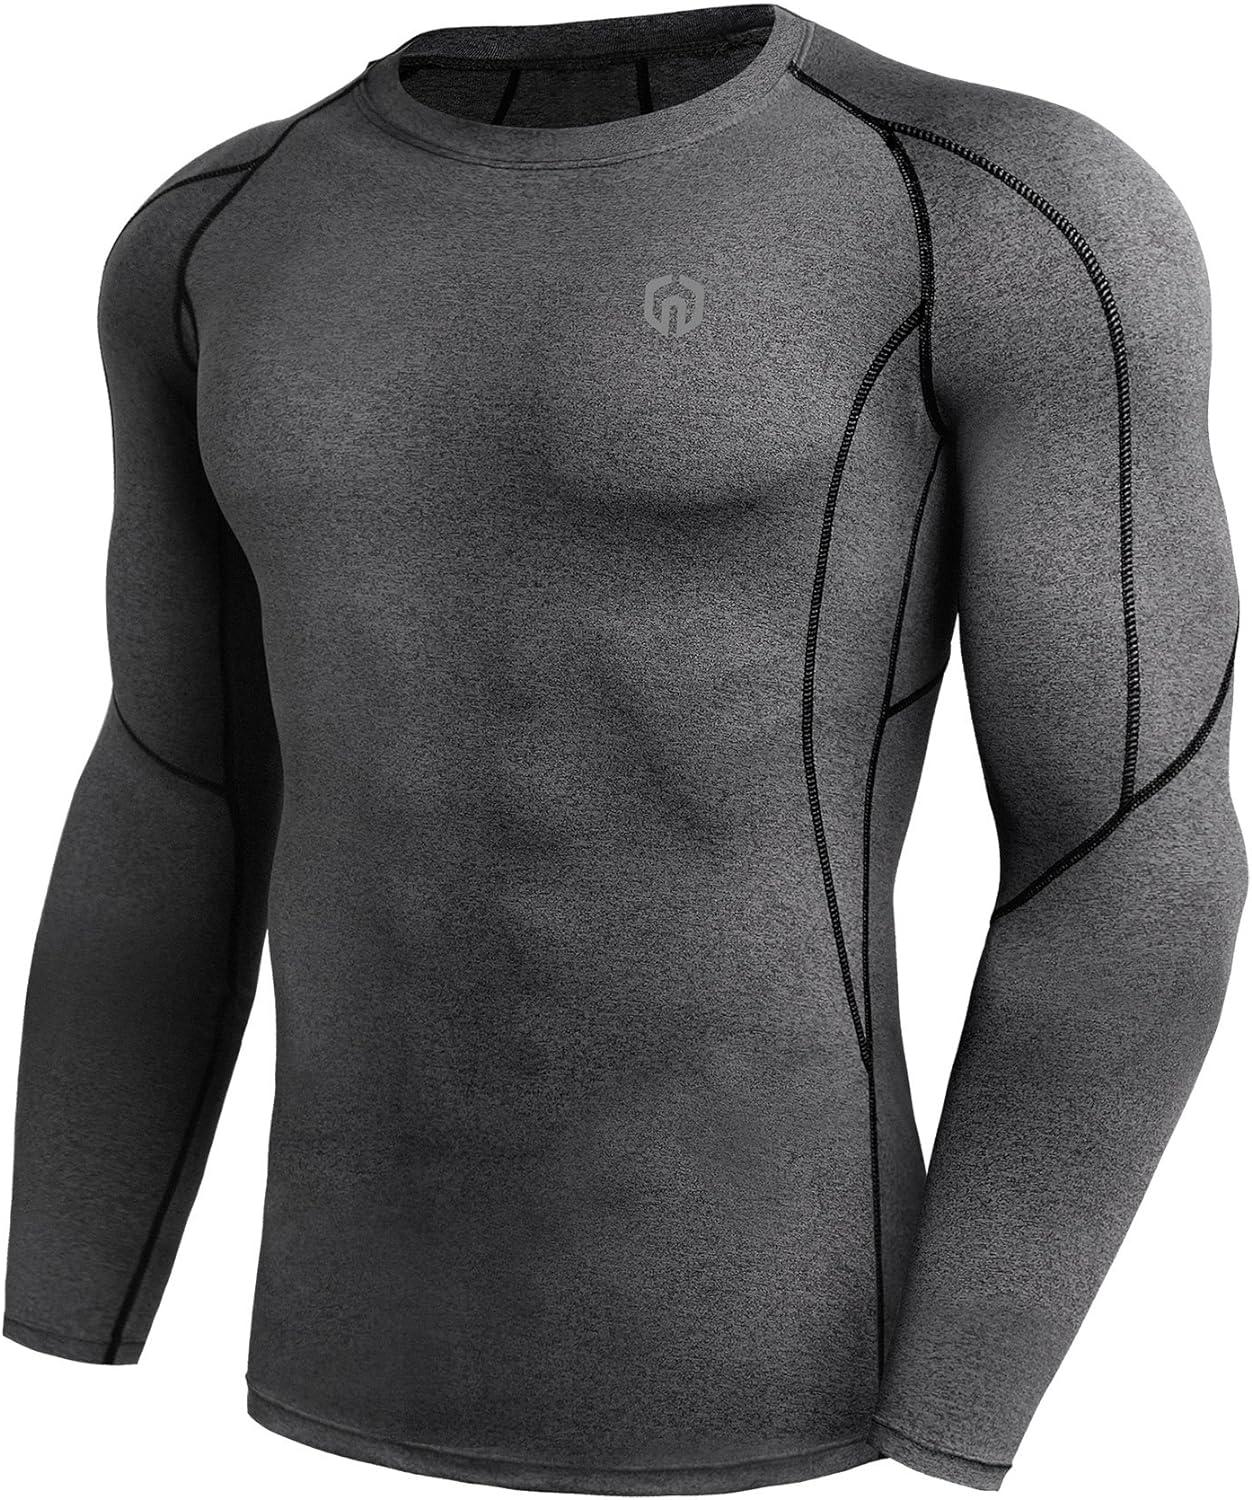 NELEUS Men's 3 Pack Dry Fit Long Sleeve Compression Shirts Workout